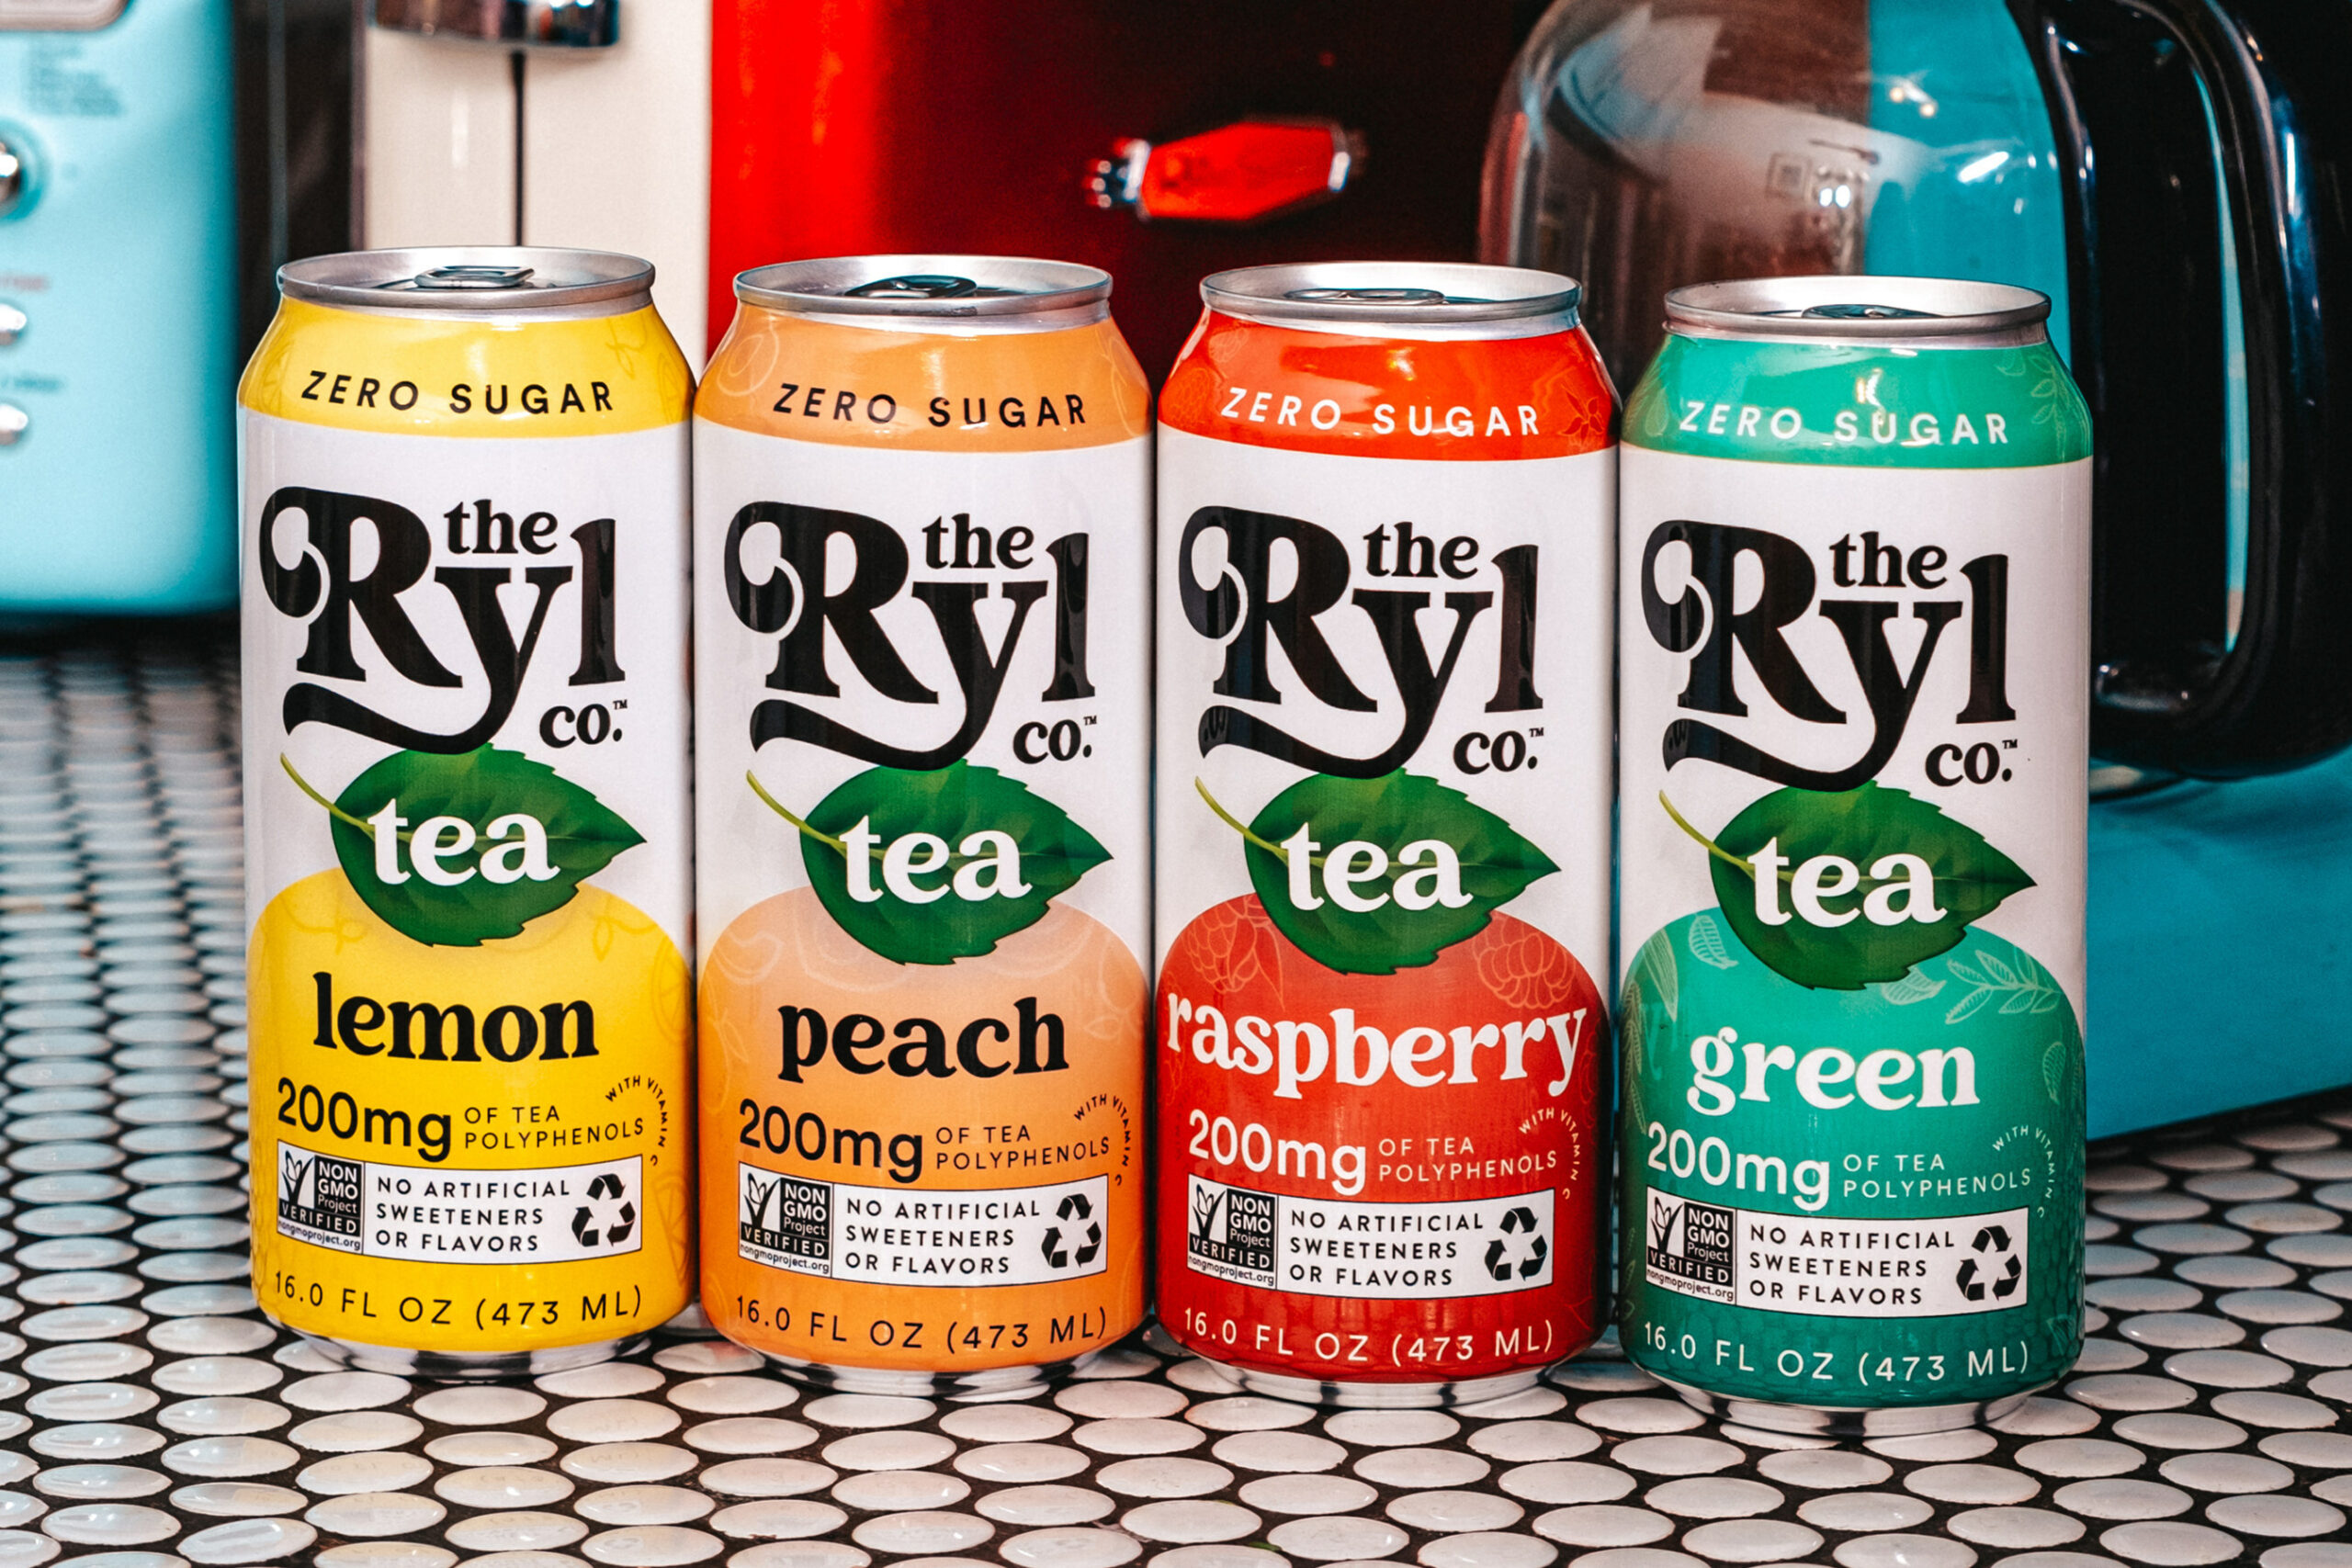 THE RYL COMPANY LLC- encouraging wellness enthusiasts to add more healthy sustainable products